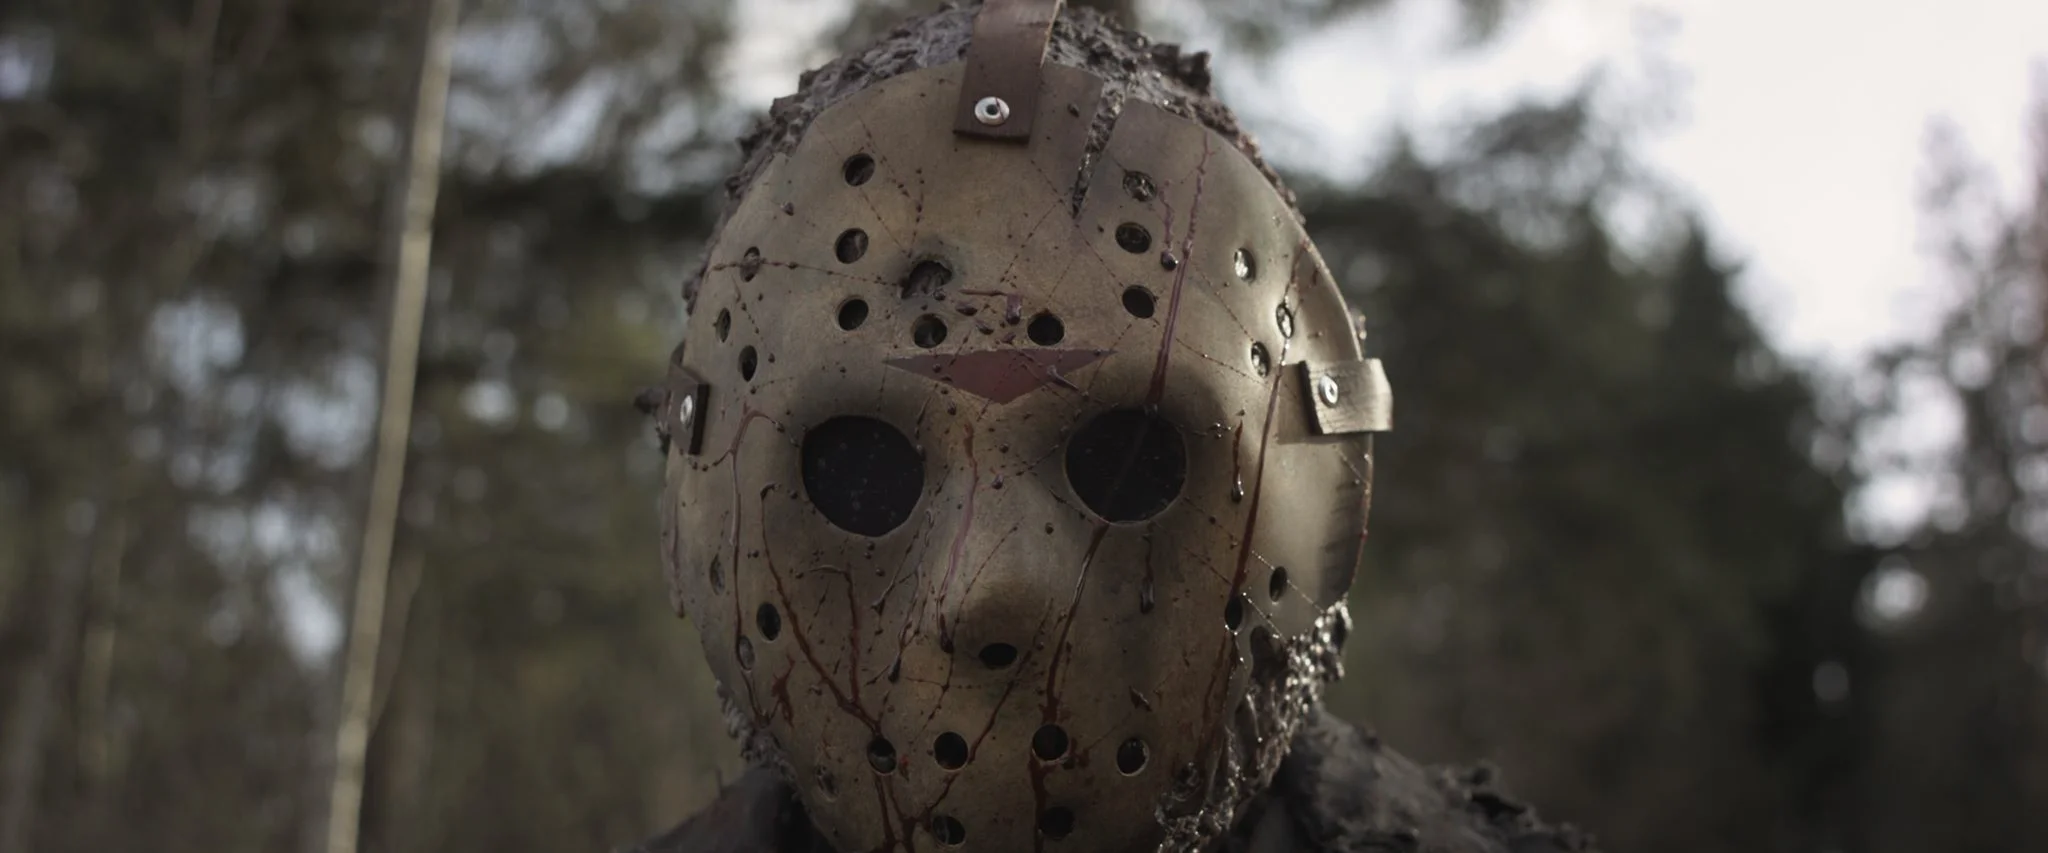 Friday the 13th Vengeance